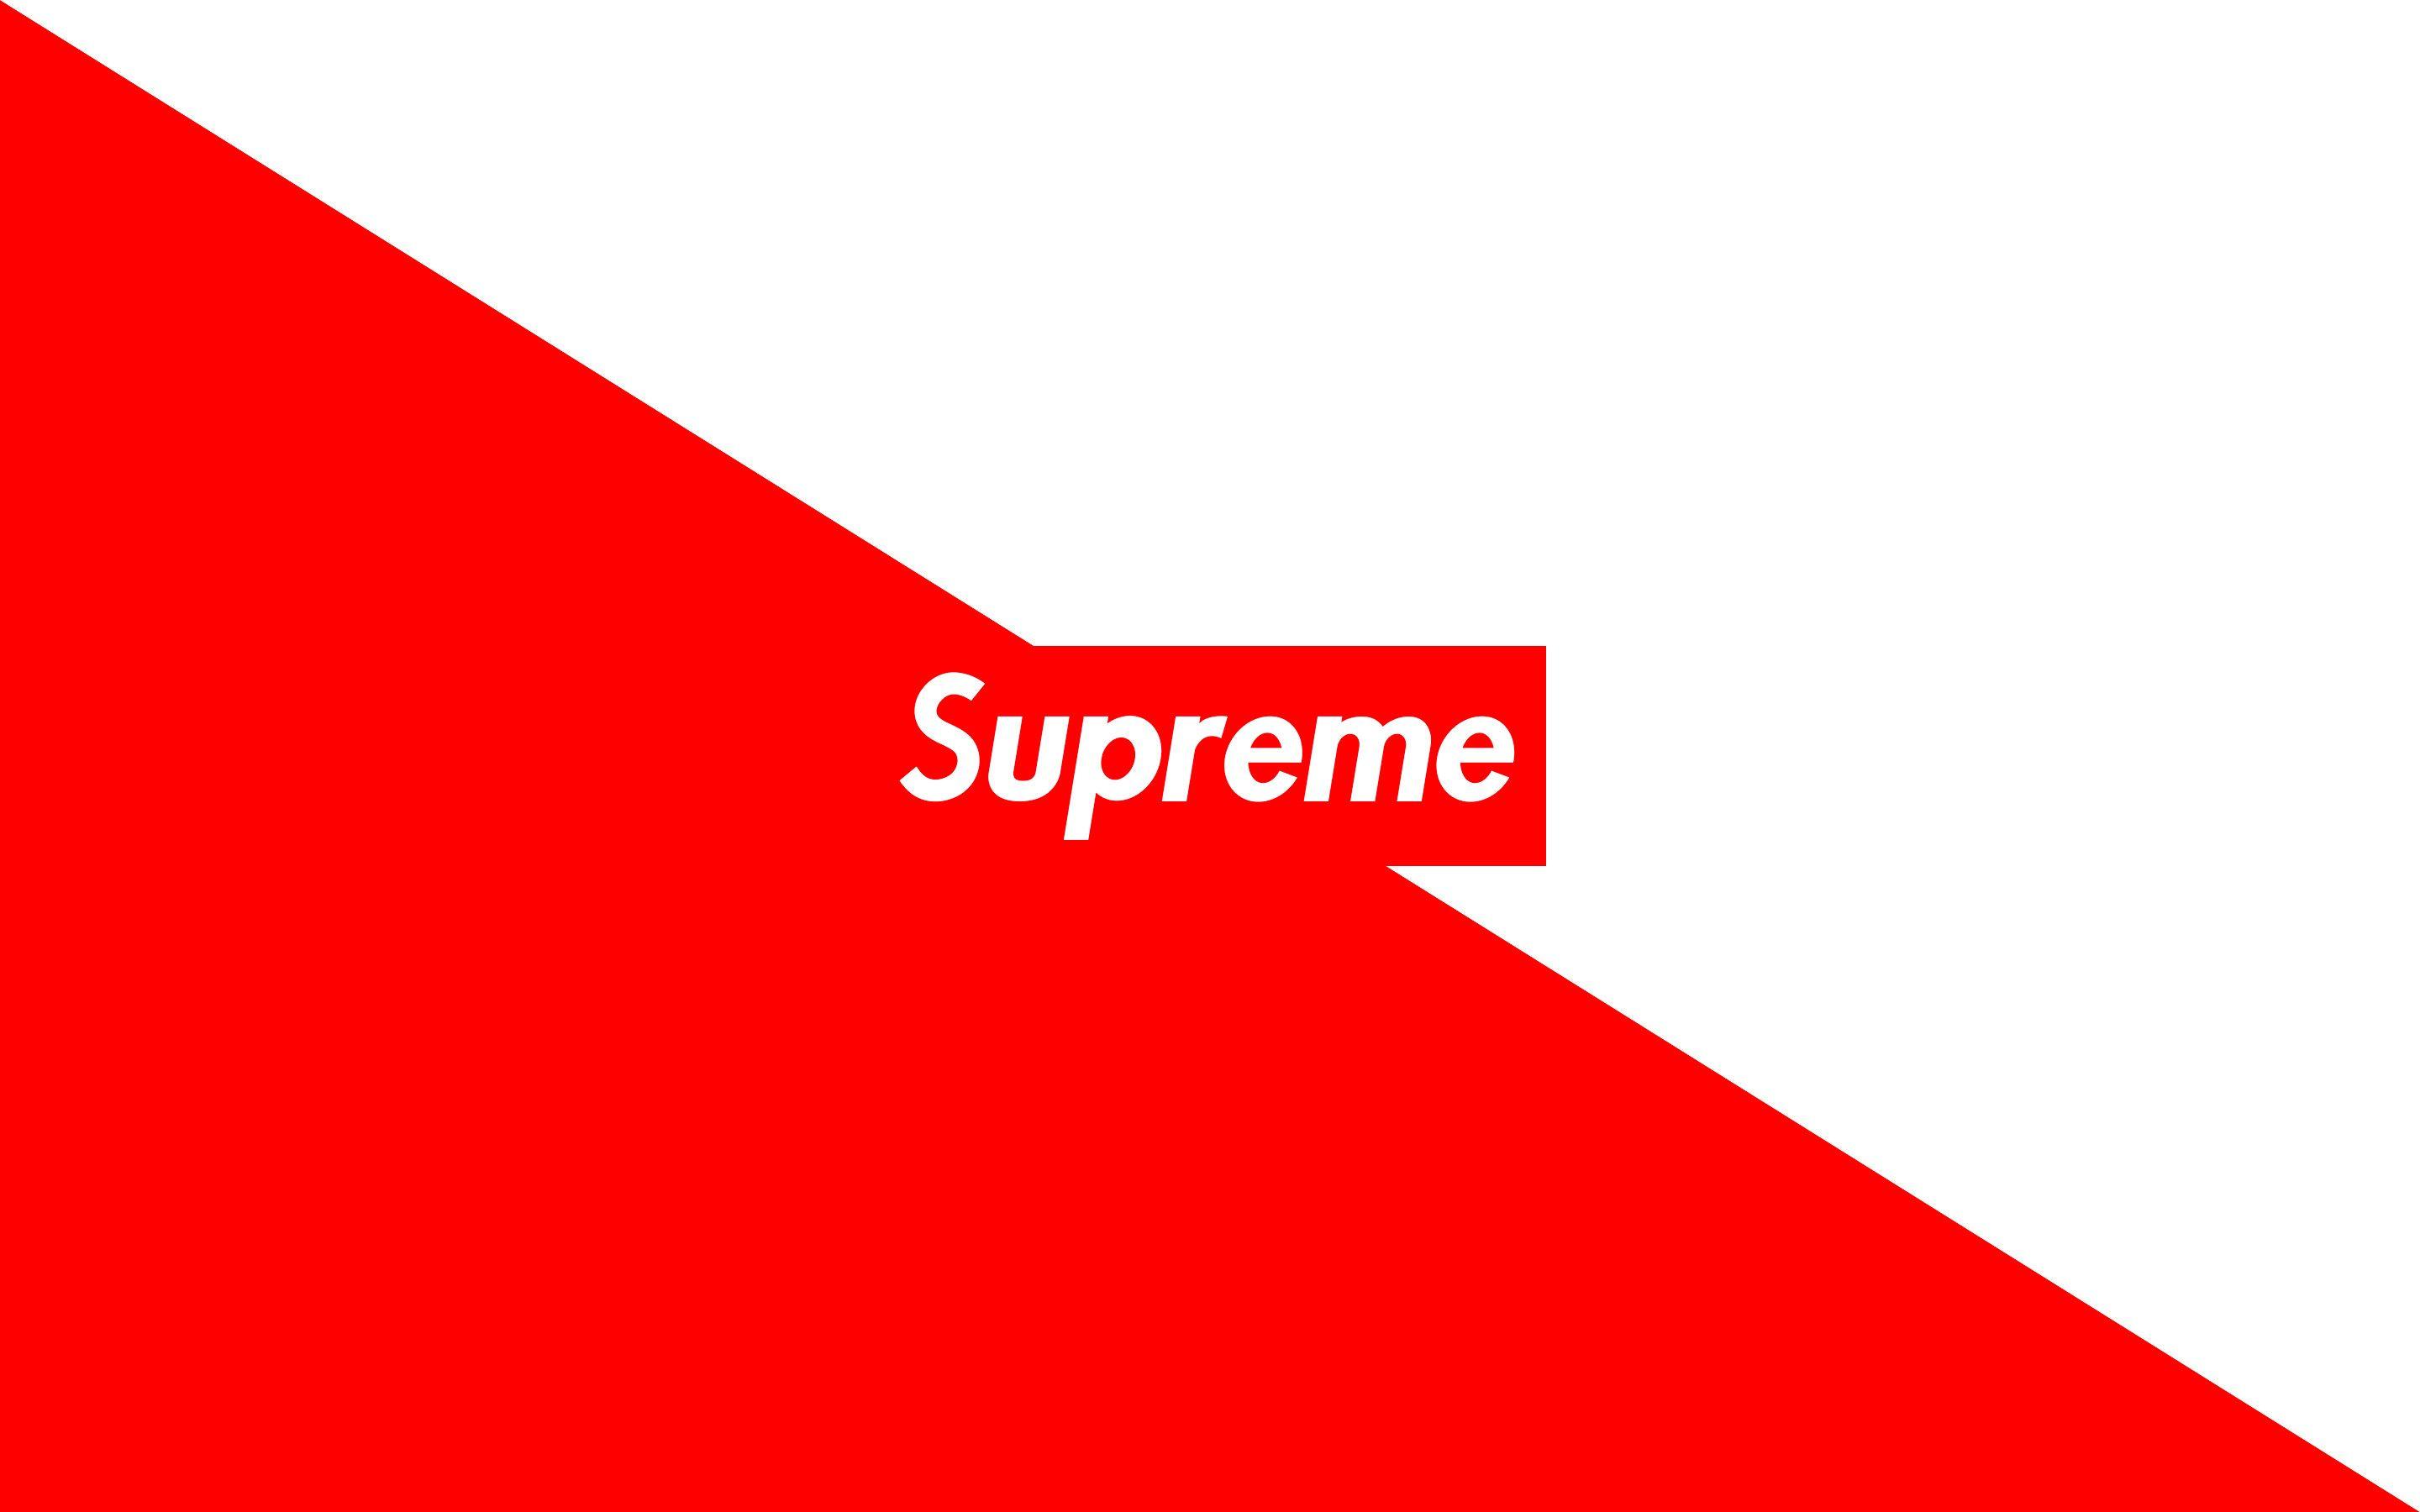 Gucci Supreme wallpaper by TrillyReign - Download on ZEDGE™